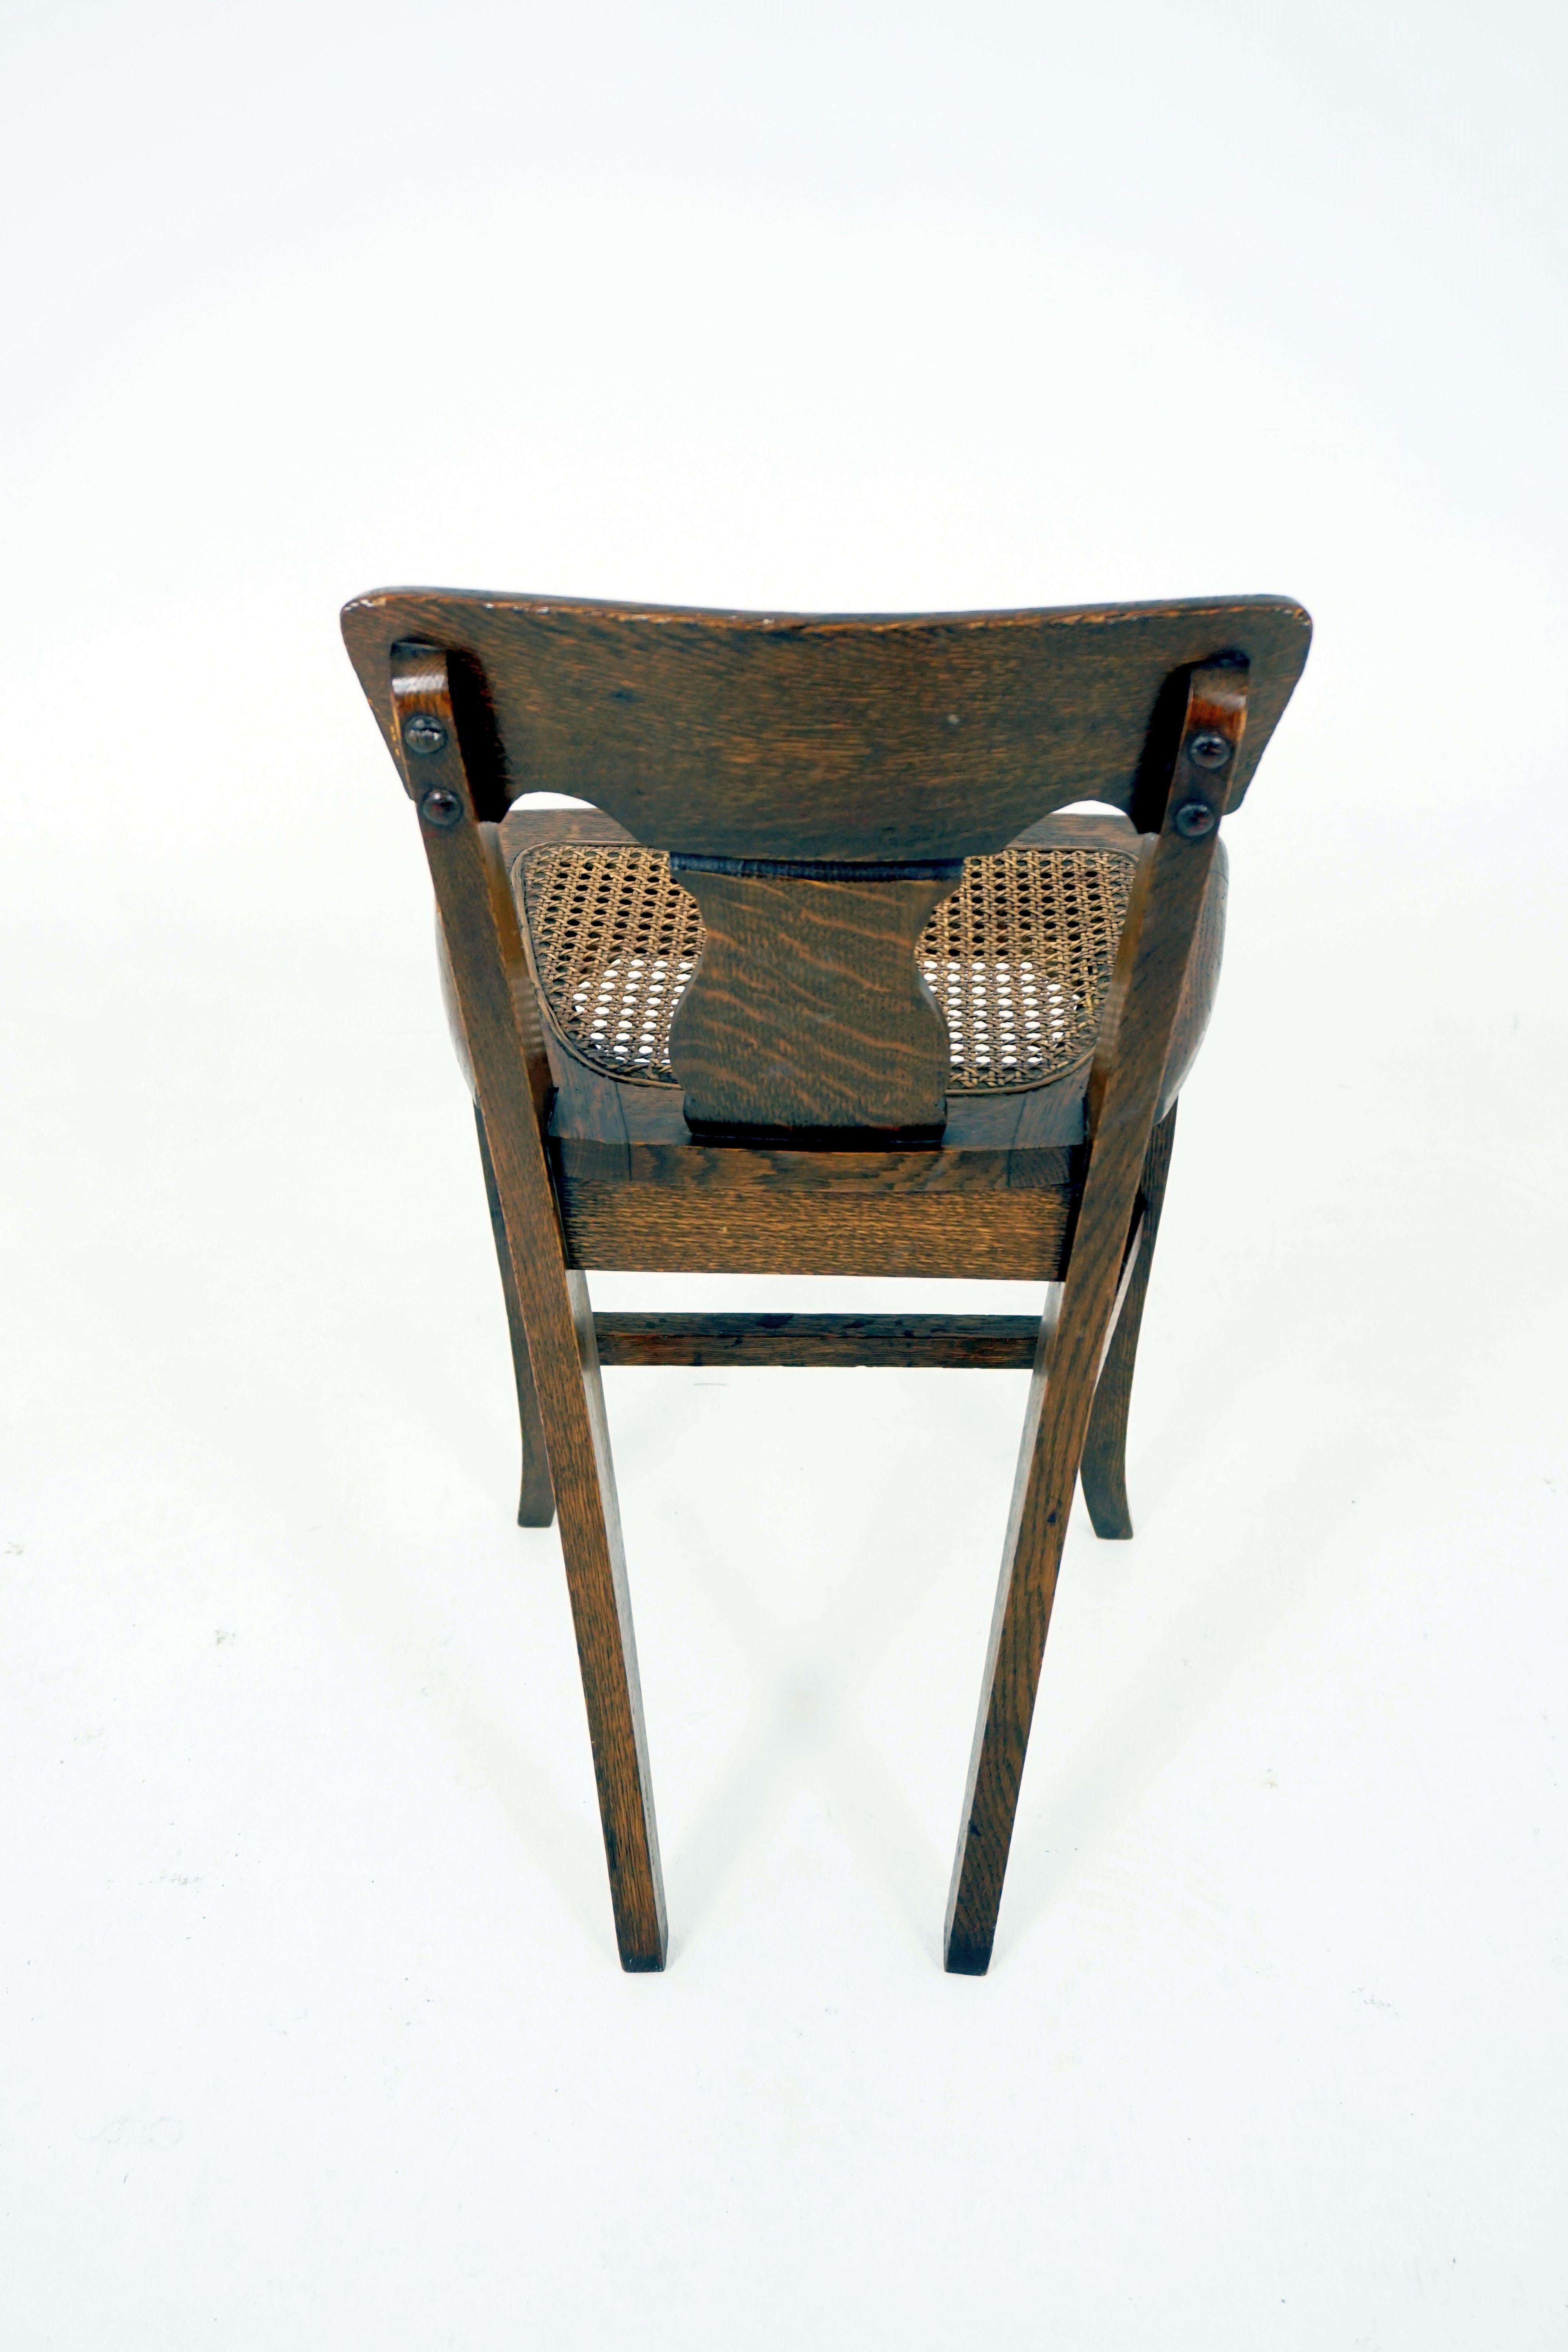 antique chairs with cane seats